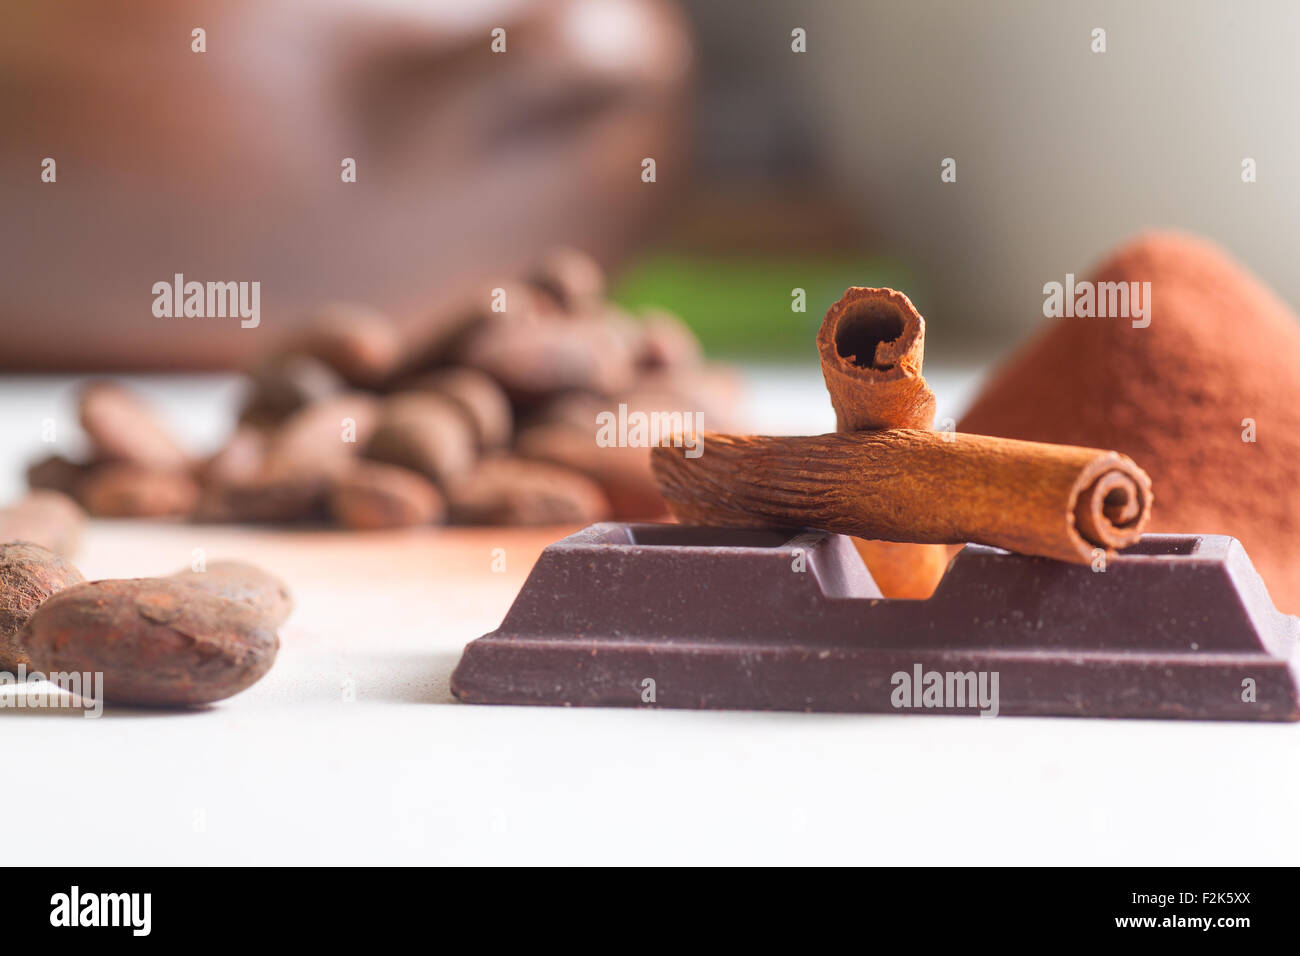 Close up of chocolate bar, cacao and cinnamon Stock Photo